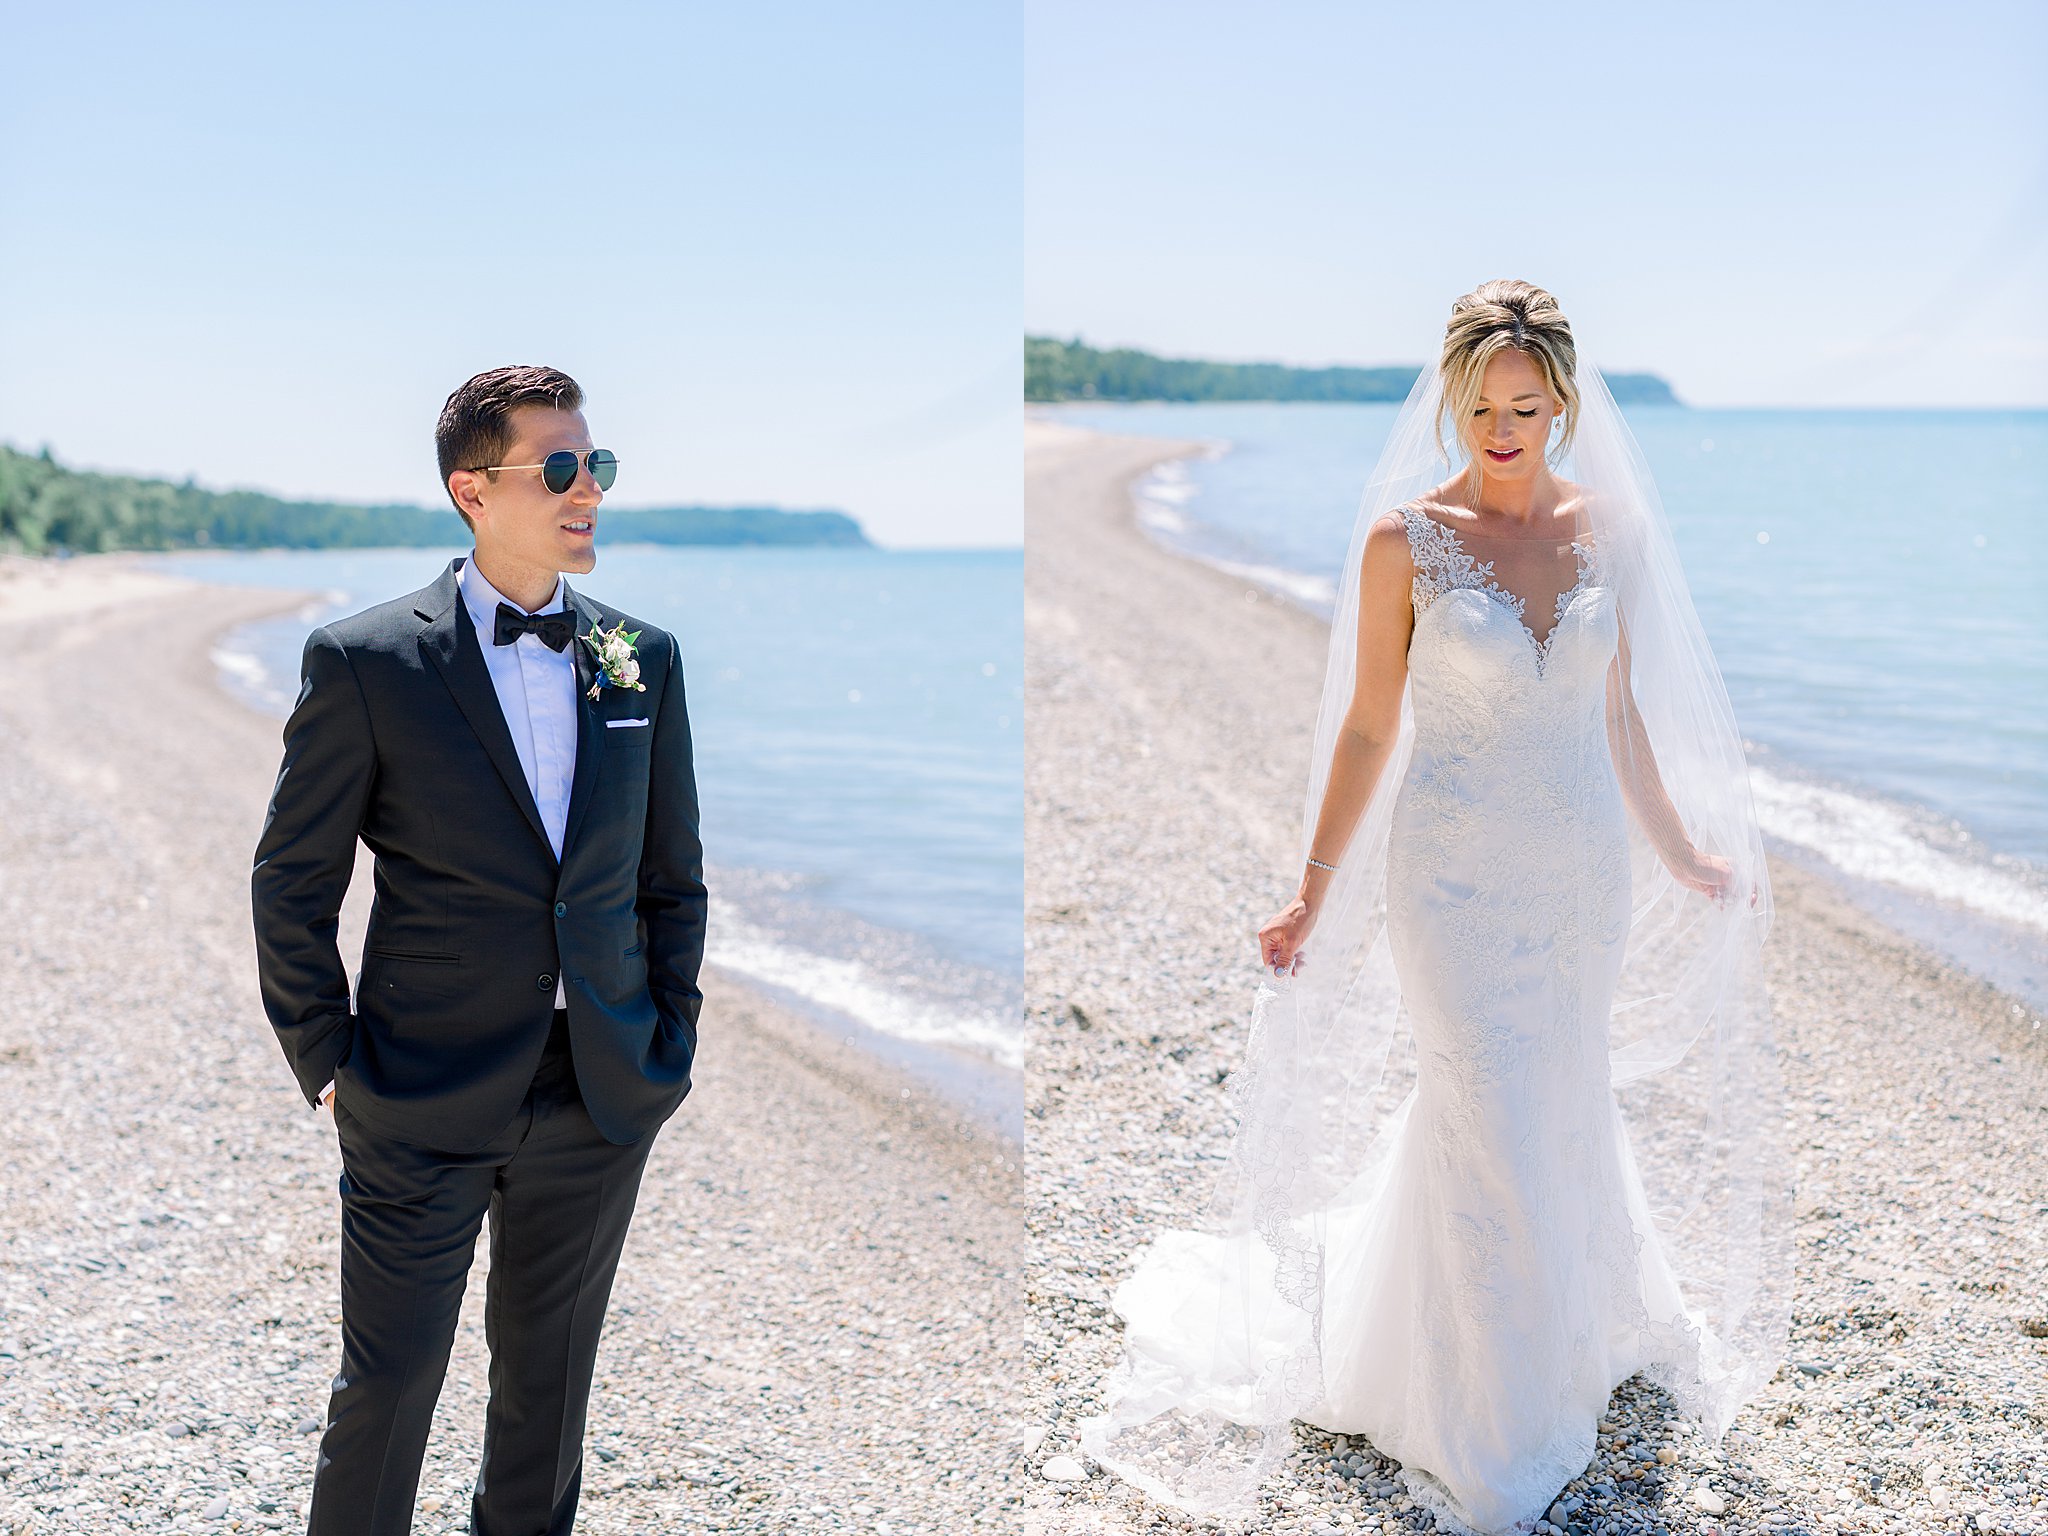 Portraits of bride and groom during their intimate Lake Michigan wedding.